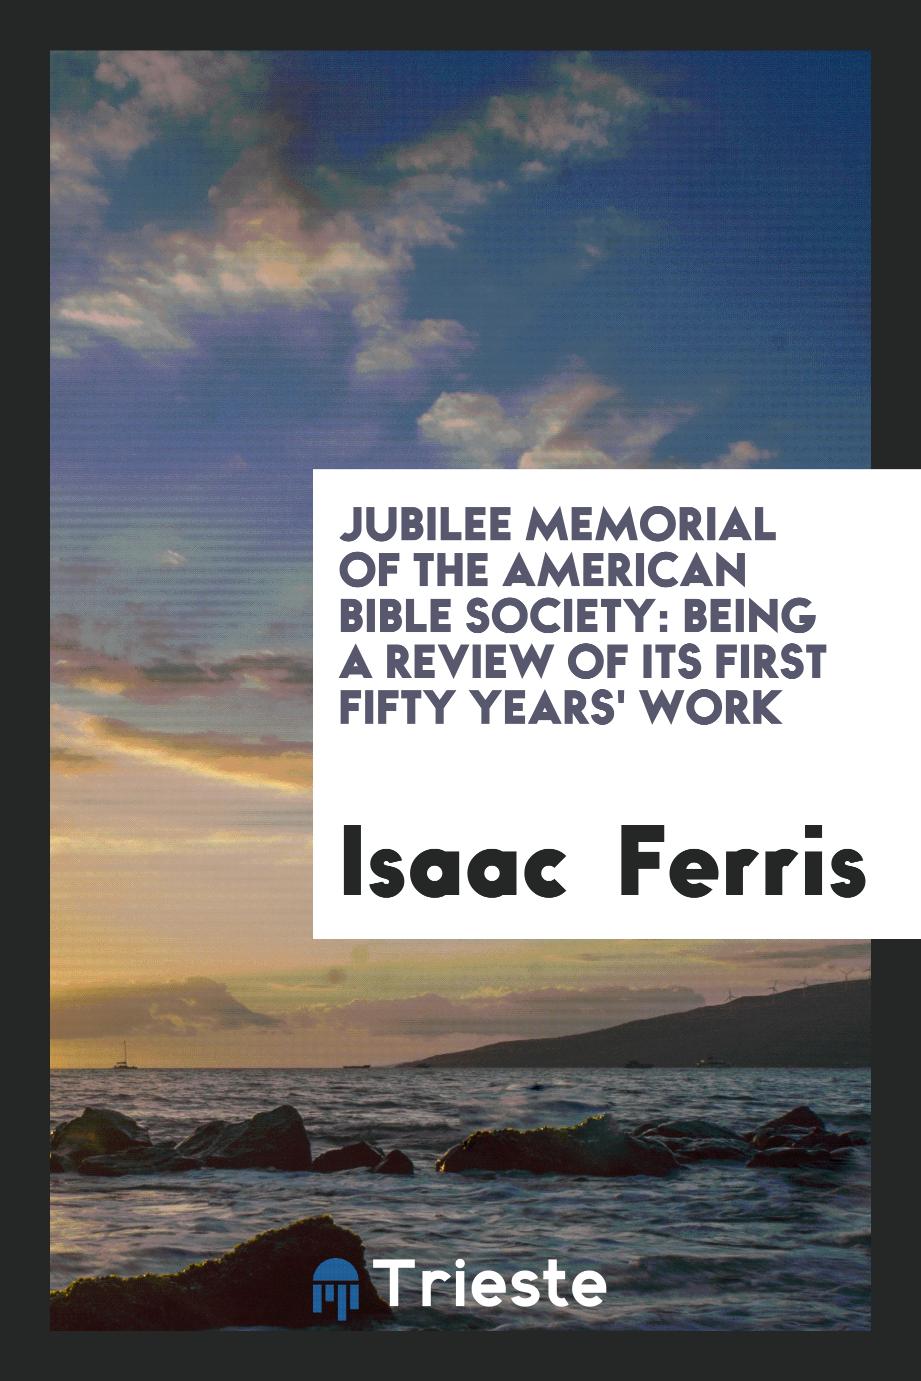 Jubilee Memorial of the American Bible Society: Being a Review of Its First Fifty Years' Work